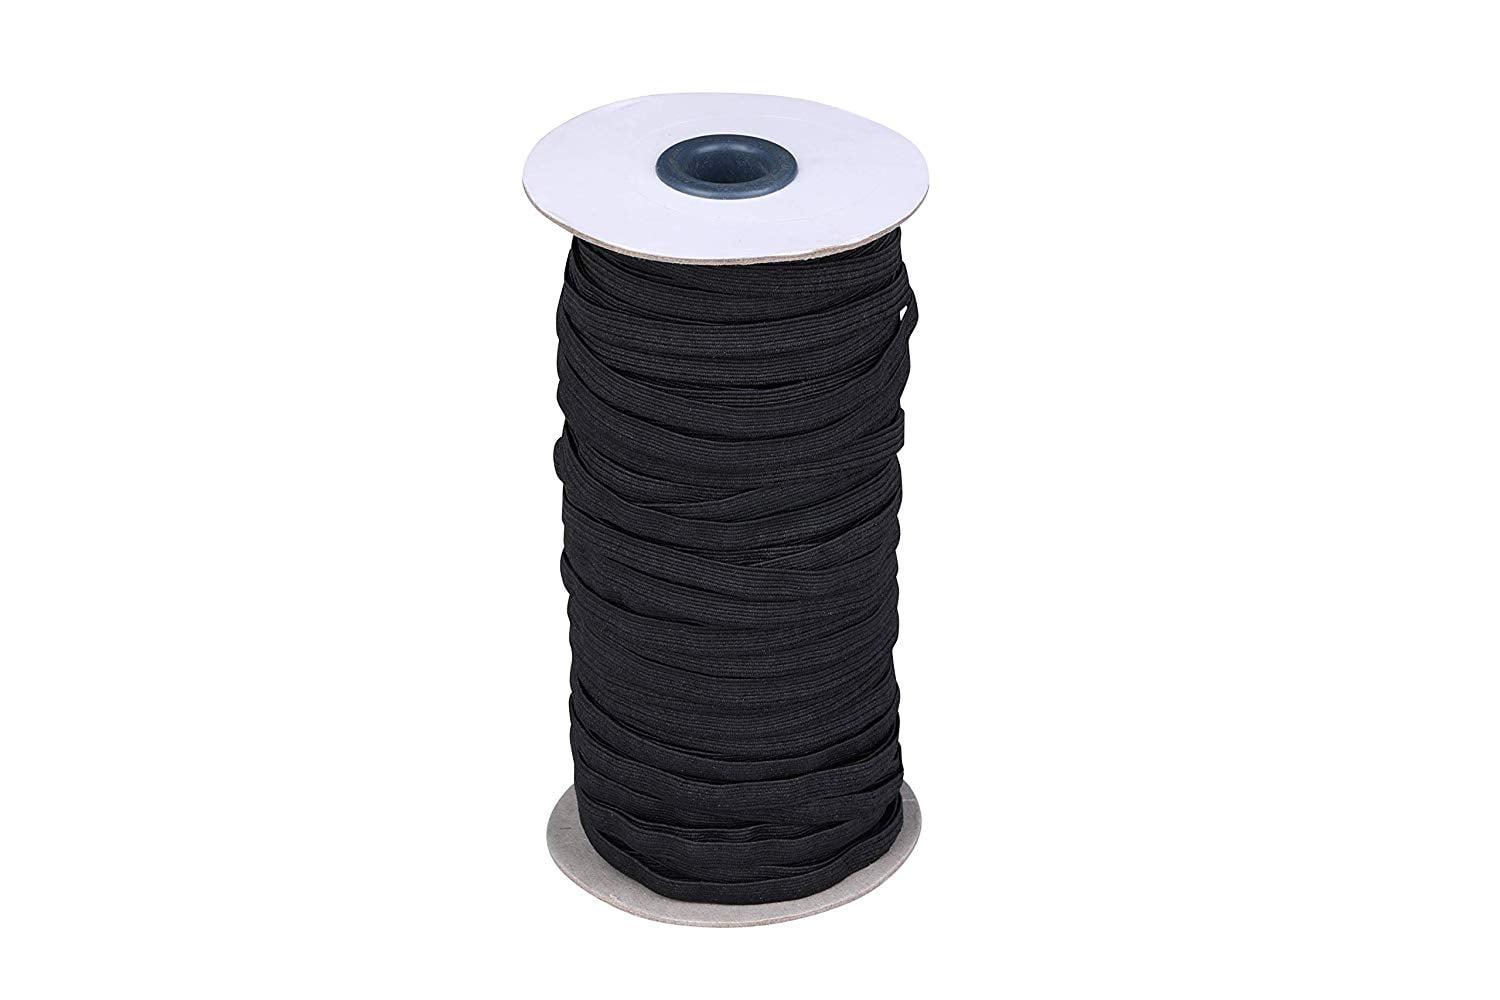 Craft Elastan Black 1/4 Inch Sewing Elastic Rope Cord String for Mask Making Stretch Elastic Band,FUTure 30ft Spool Knit Roll